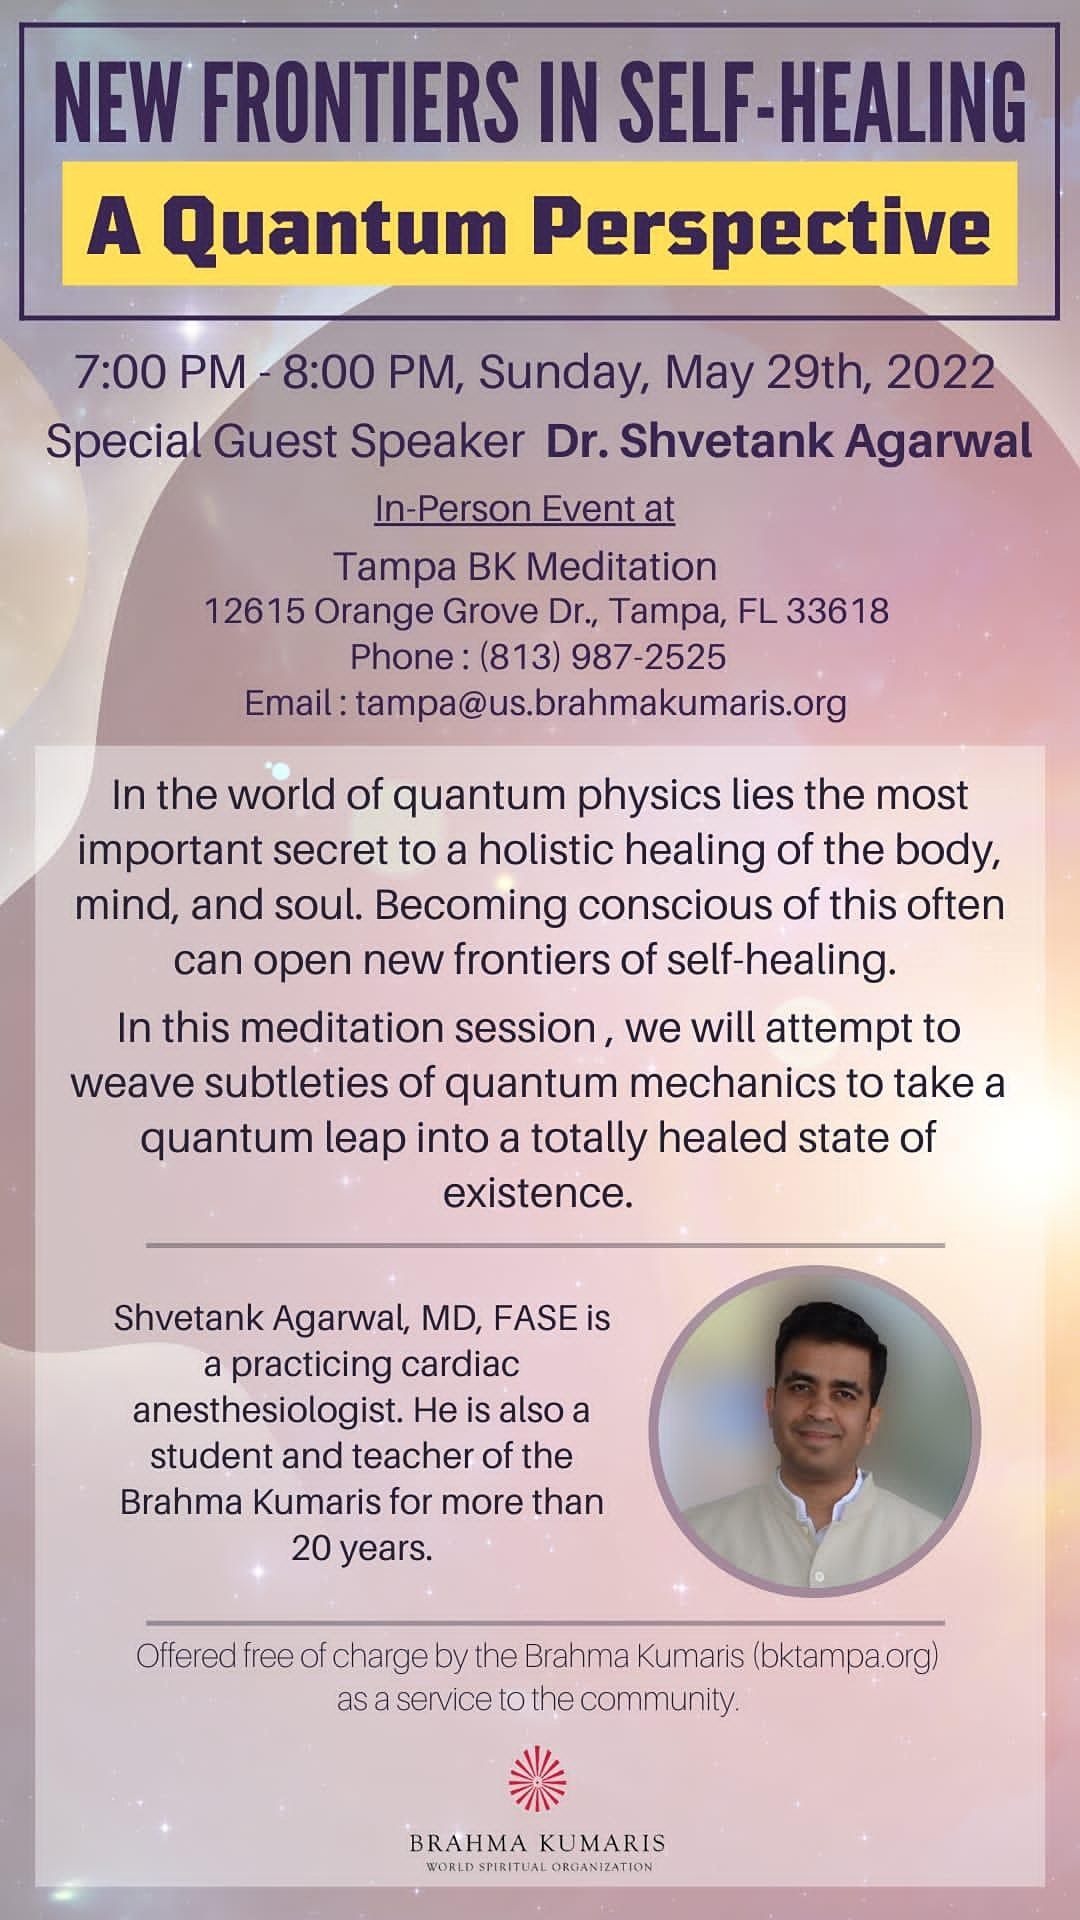 New Frontiers in Self-Healing. A Quantum Perspective